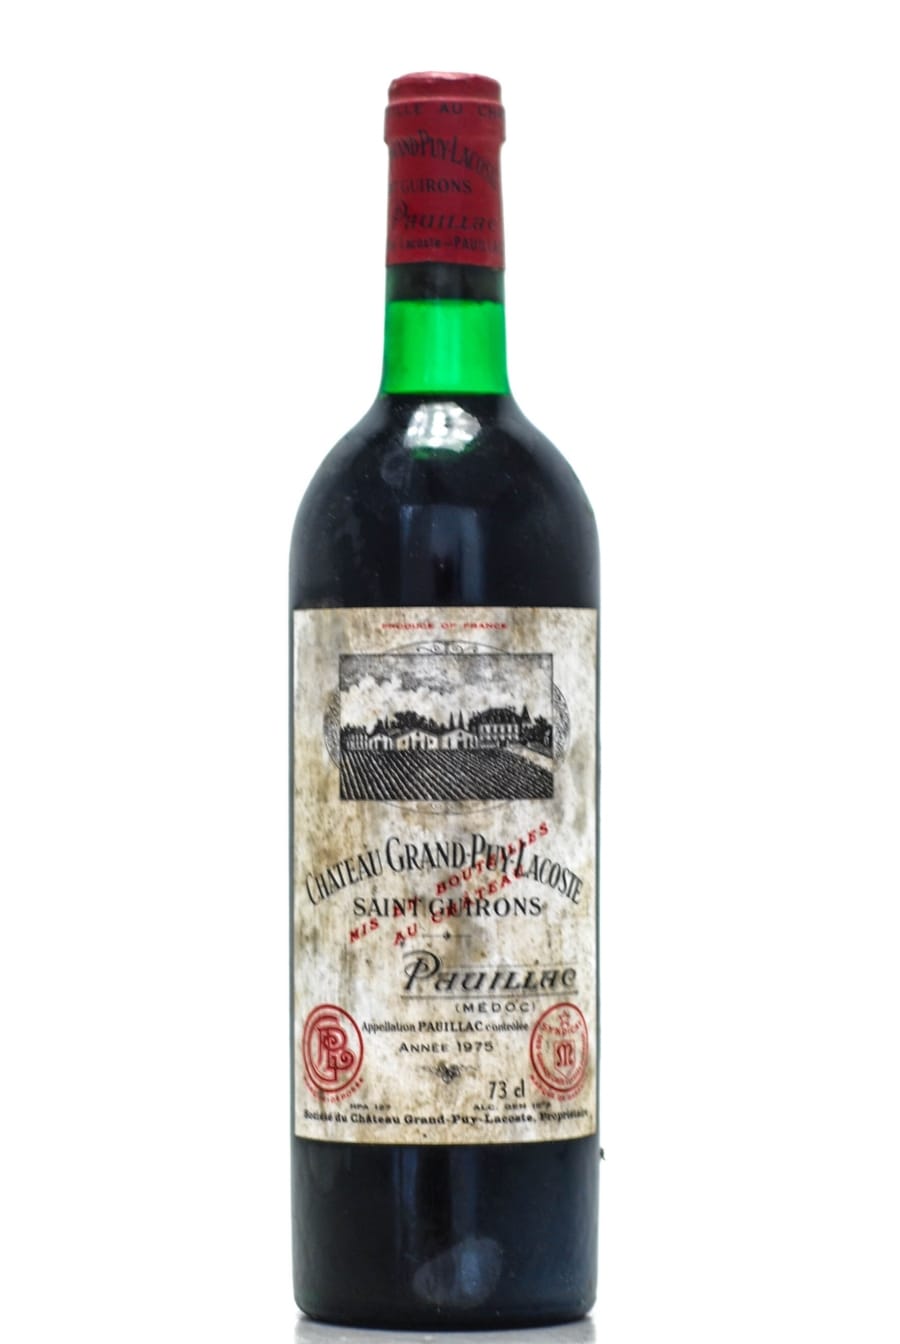 Chateau Grand Puy Lacoste - Chateau Grand Puy Lacoste 1975 Perfect